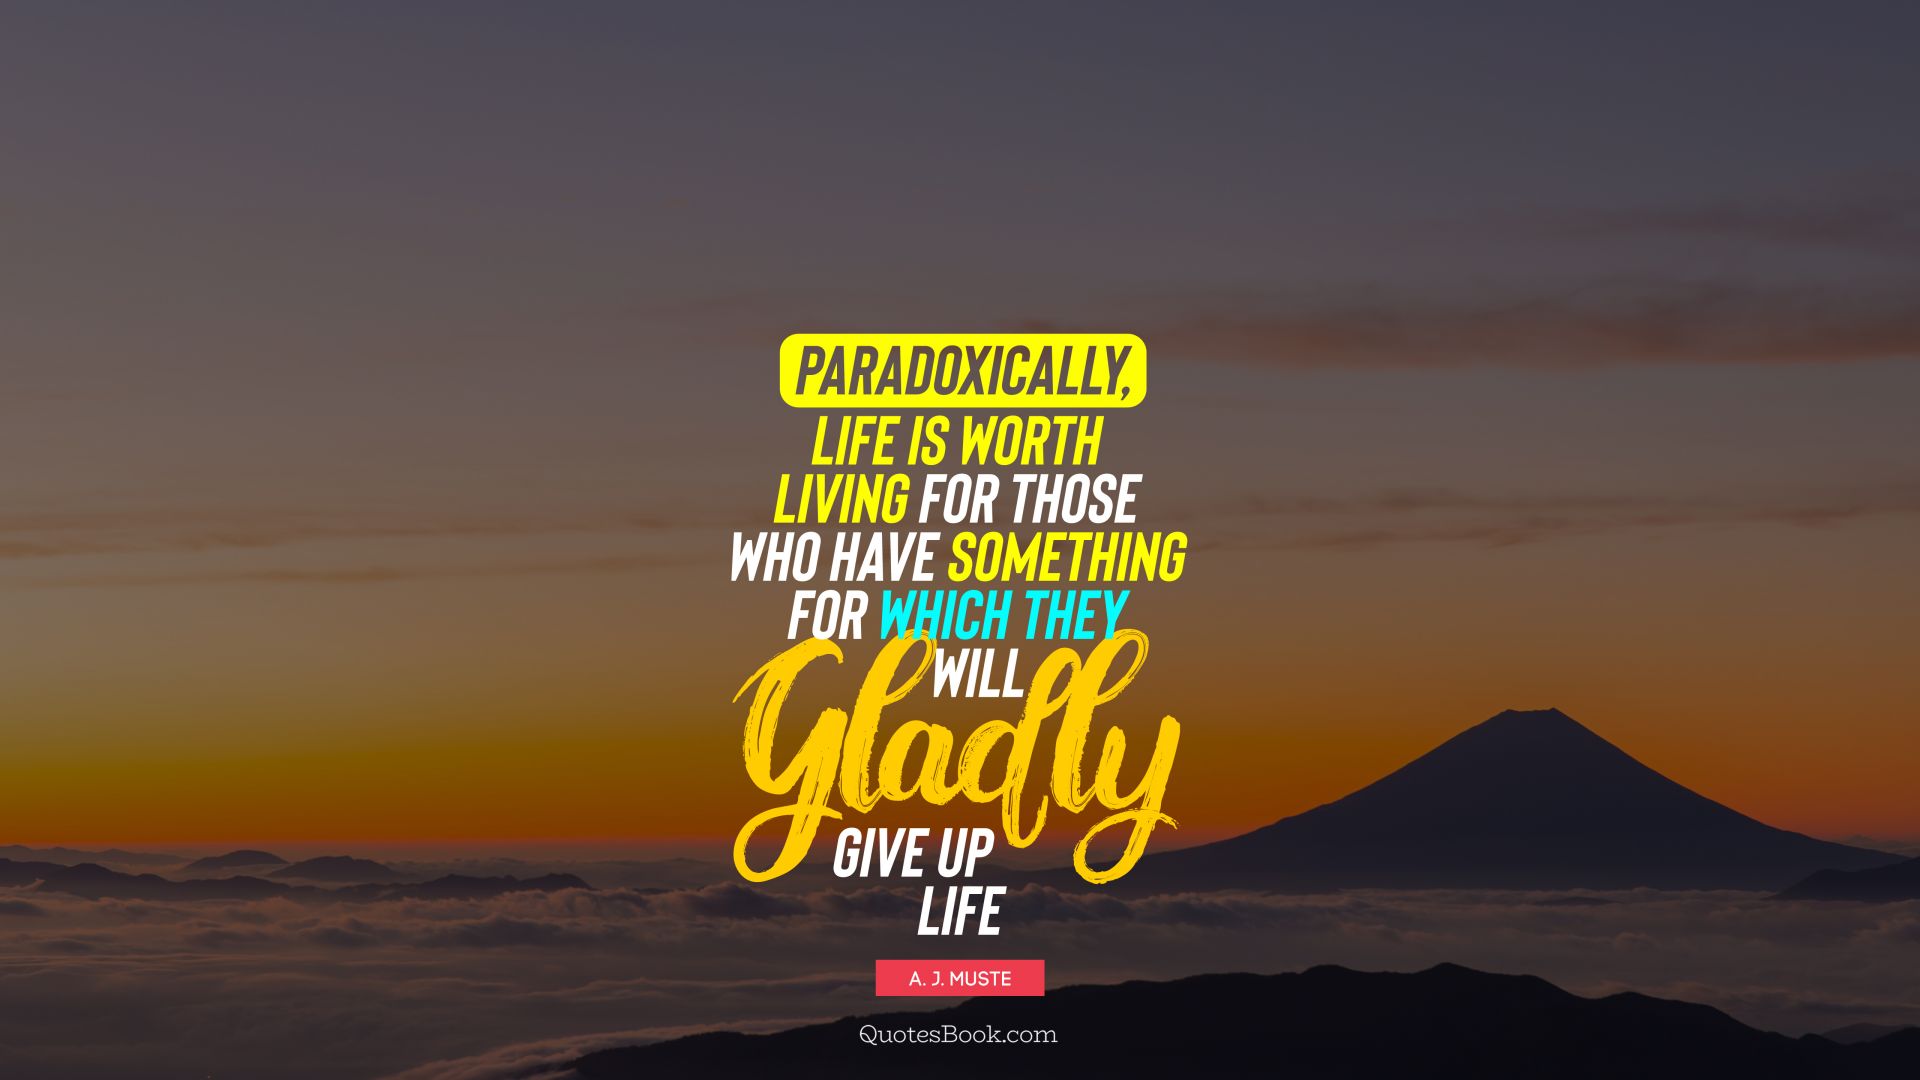 Paradoxically, life is worth living for those who have something for which they will gladly give up life. - Quote by A. J. Muste